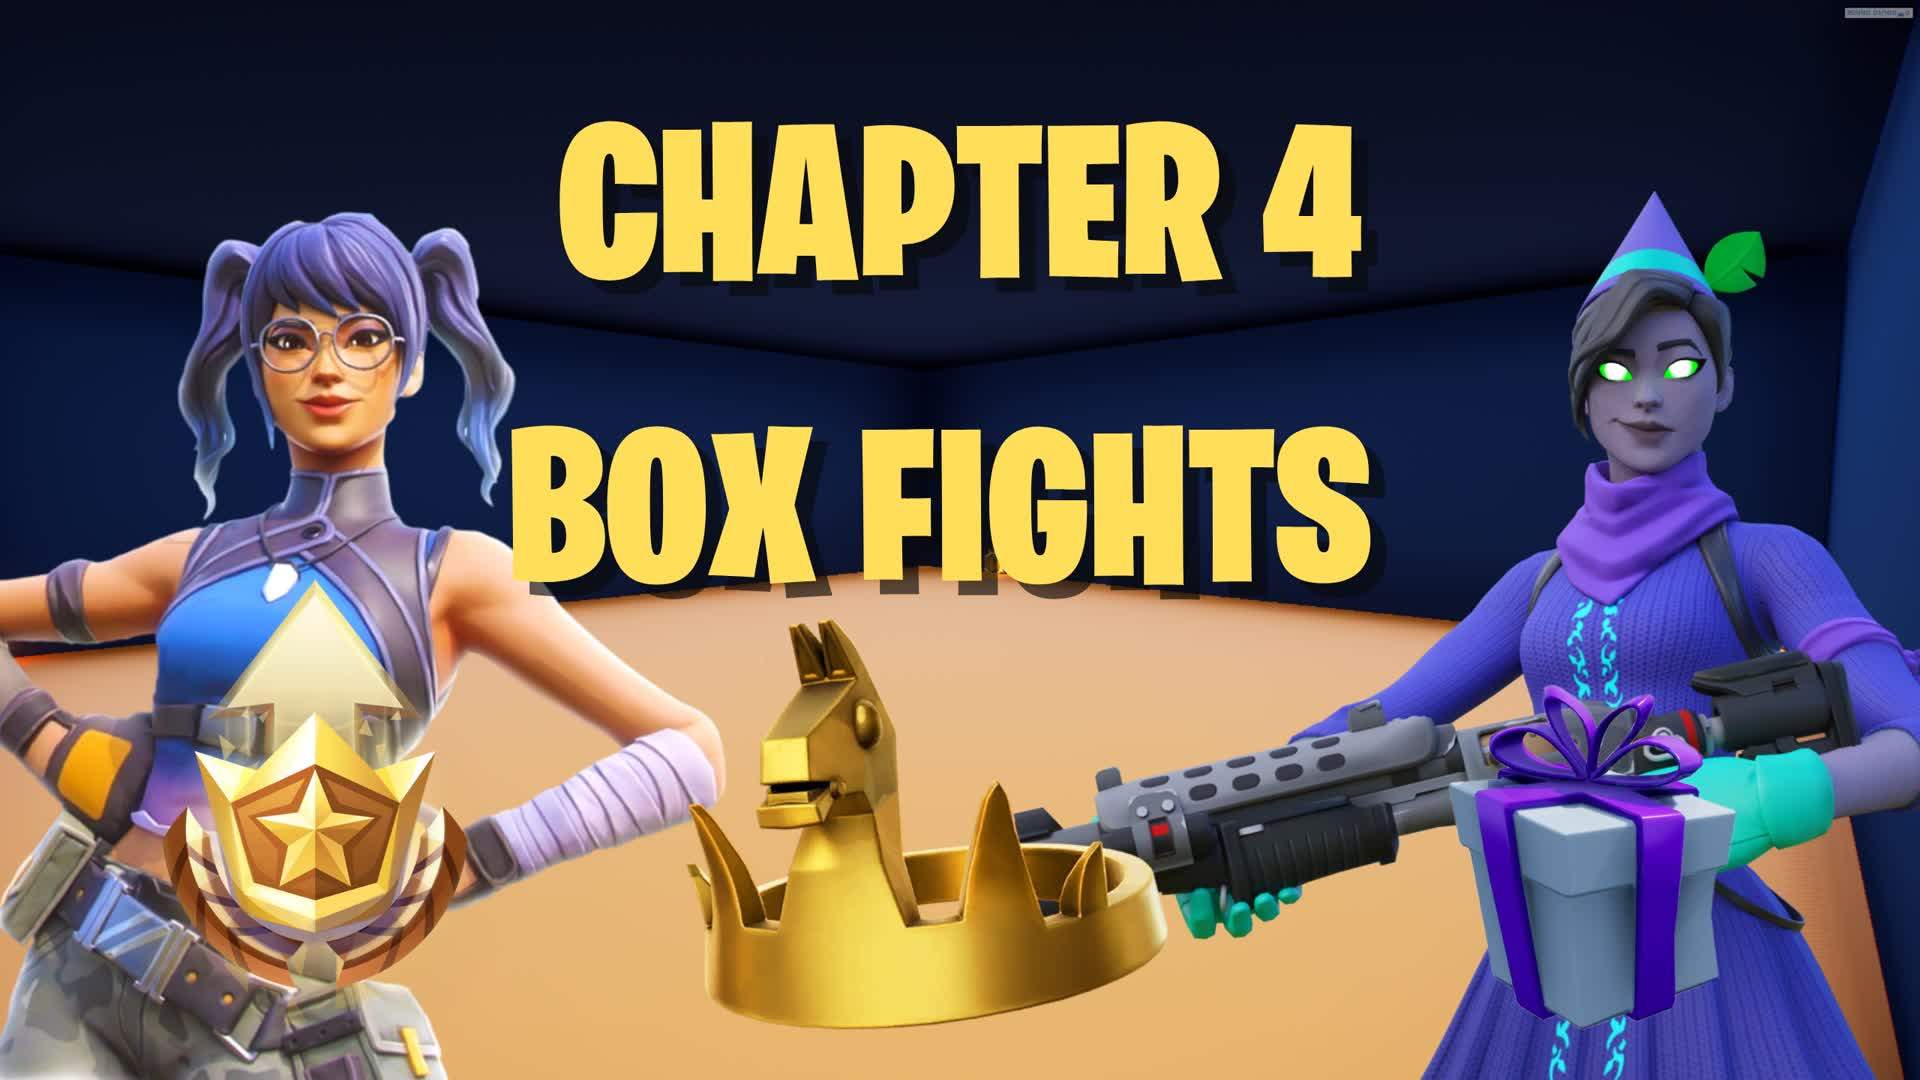 🏆 CHAPTER 4 BOX FIGHTS 🏅